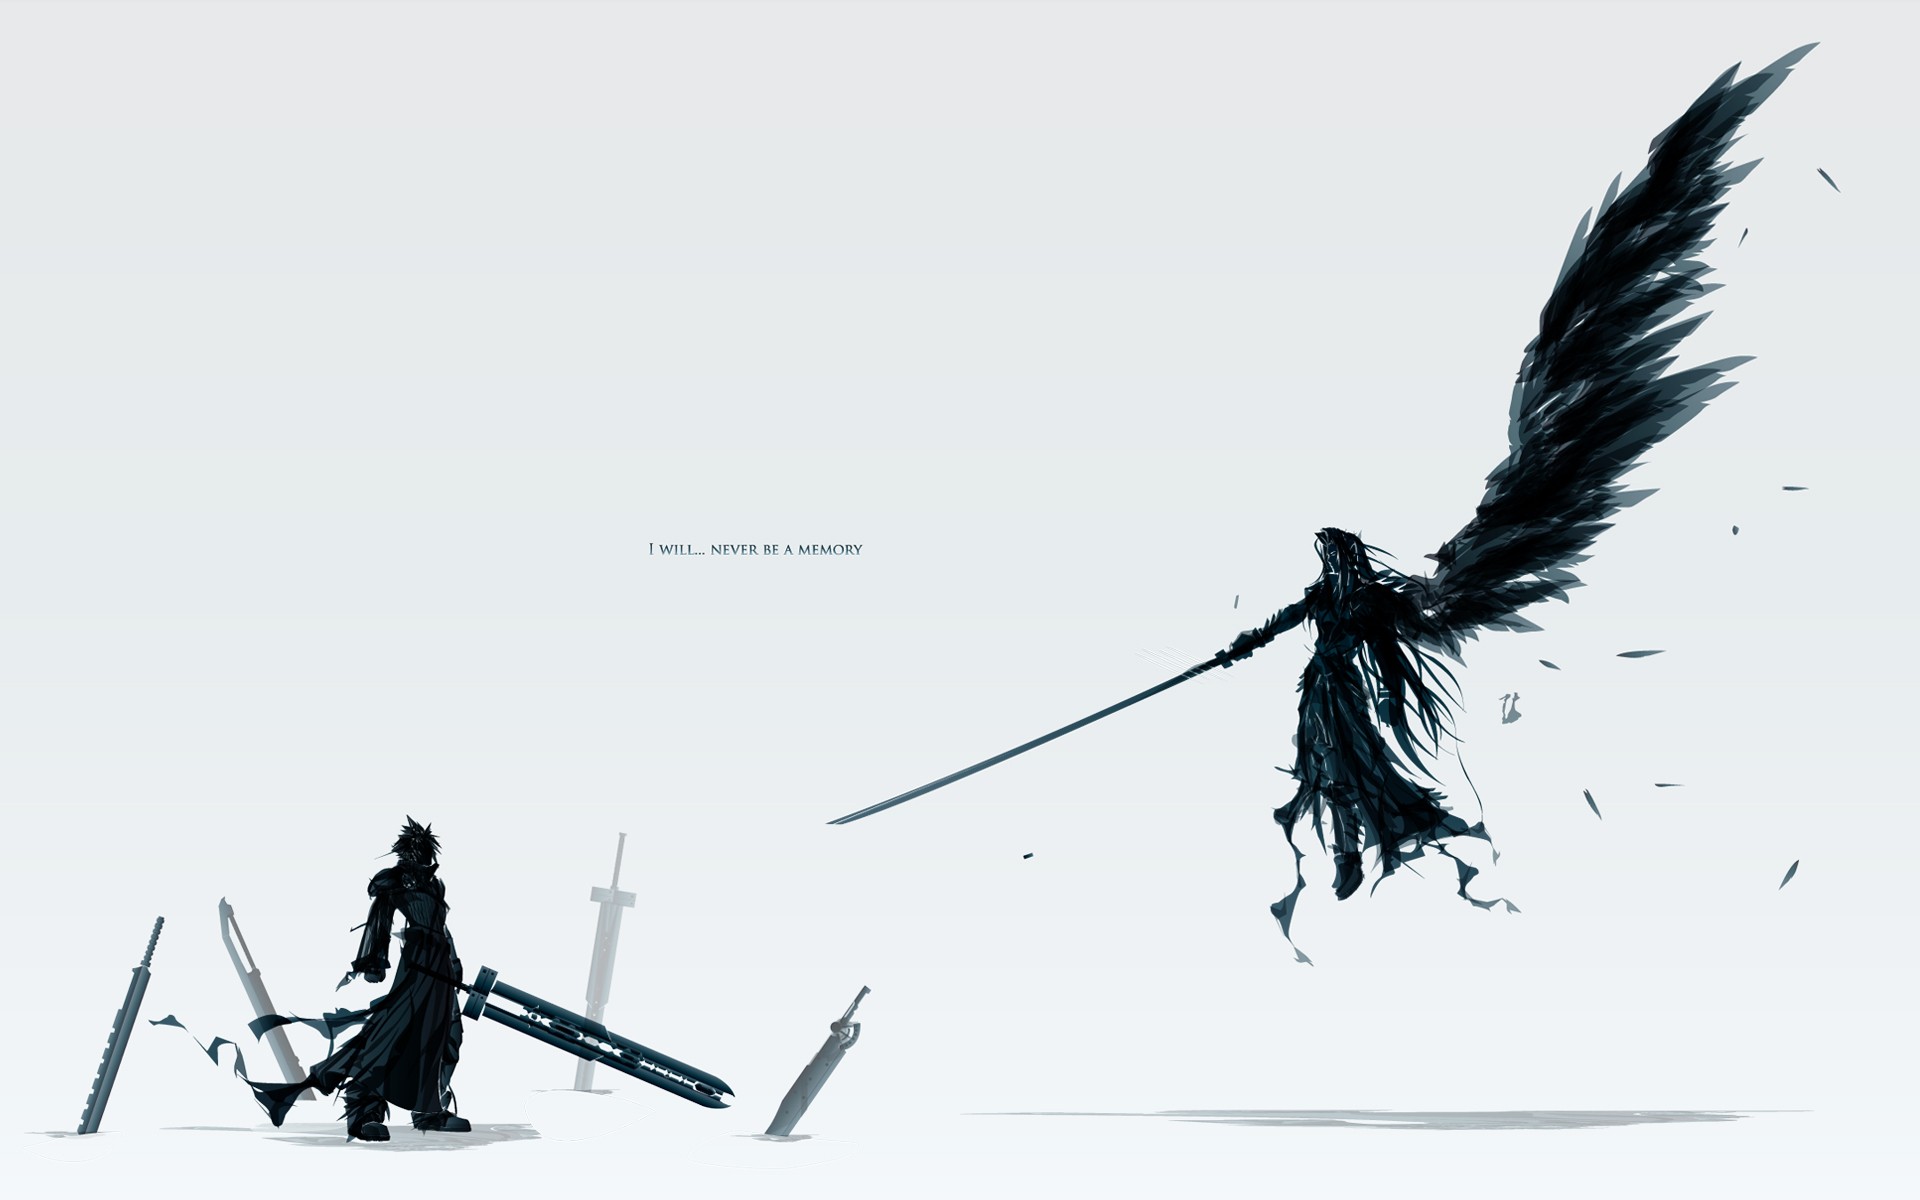 FF7 wallpaper ·① Download free wallpapers for desktop and 